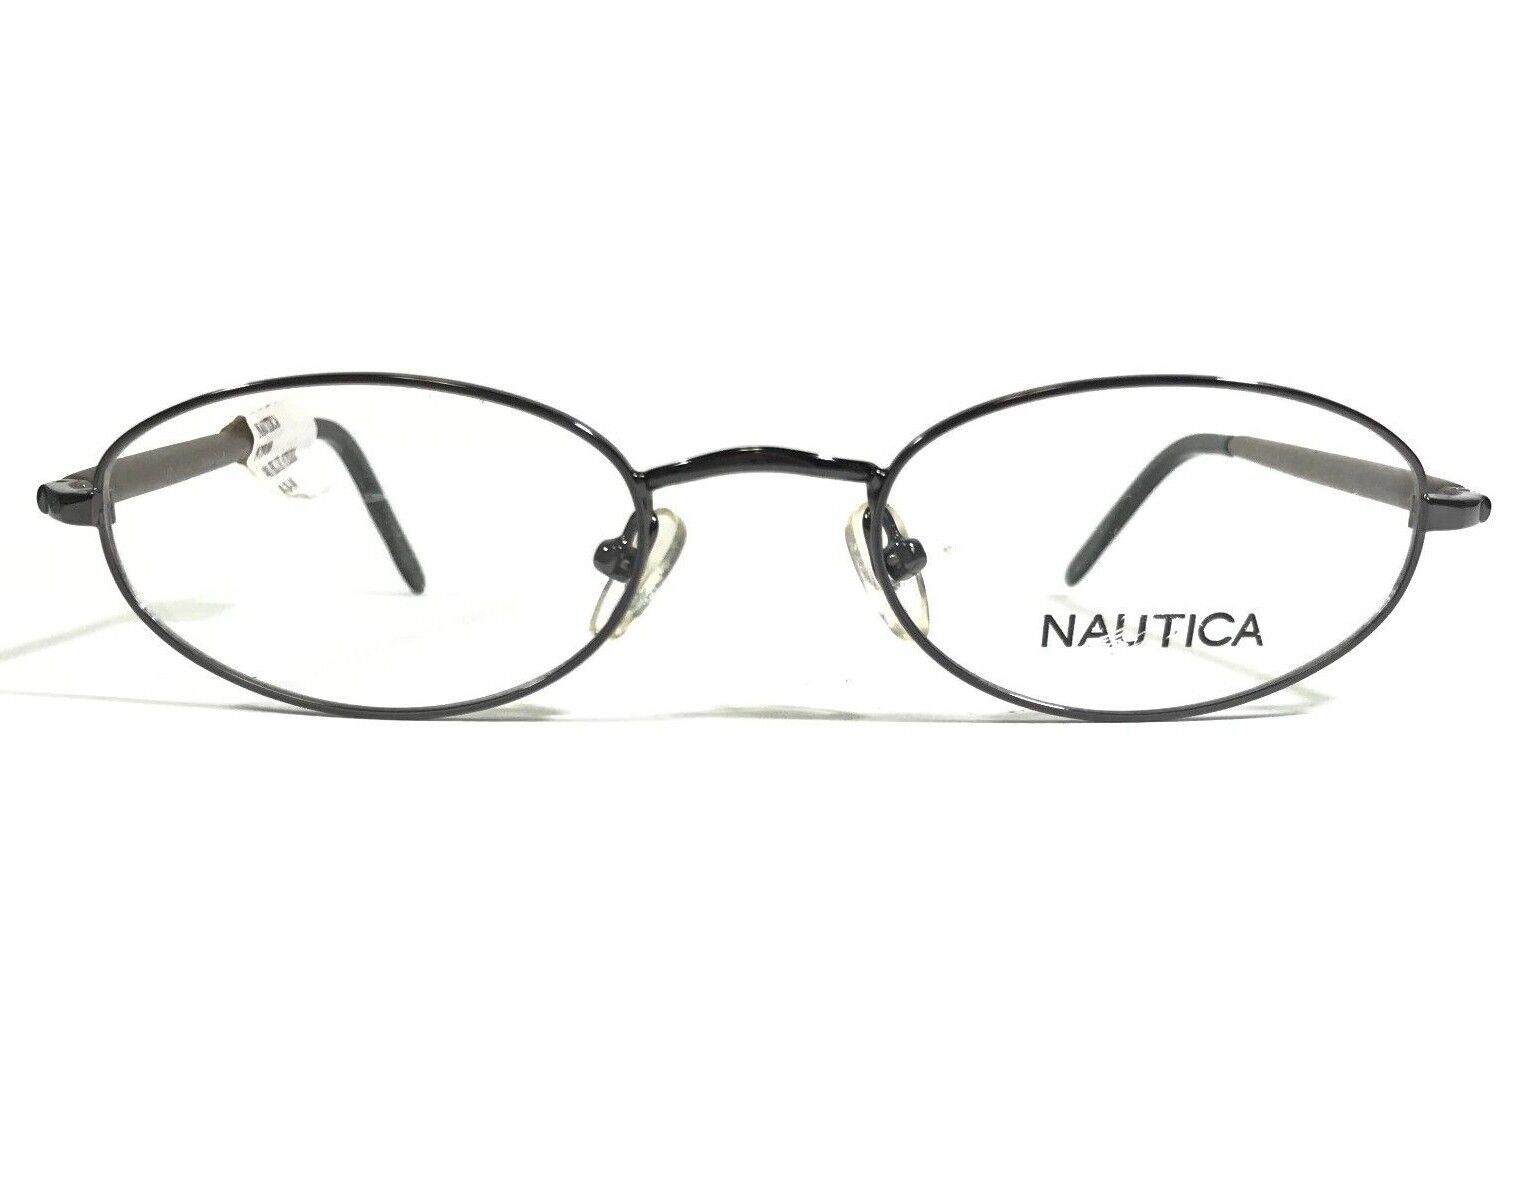 Primary image for Nautica N7900 401 Eyeglasses Frames Brown blue Grey Round Wire Rim 49-20-140